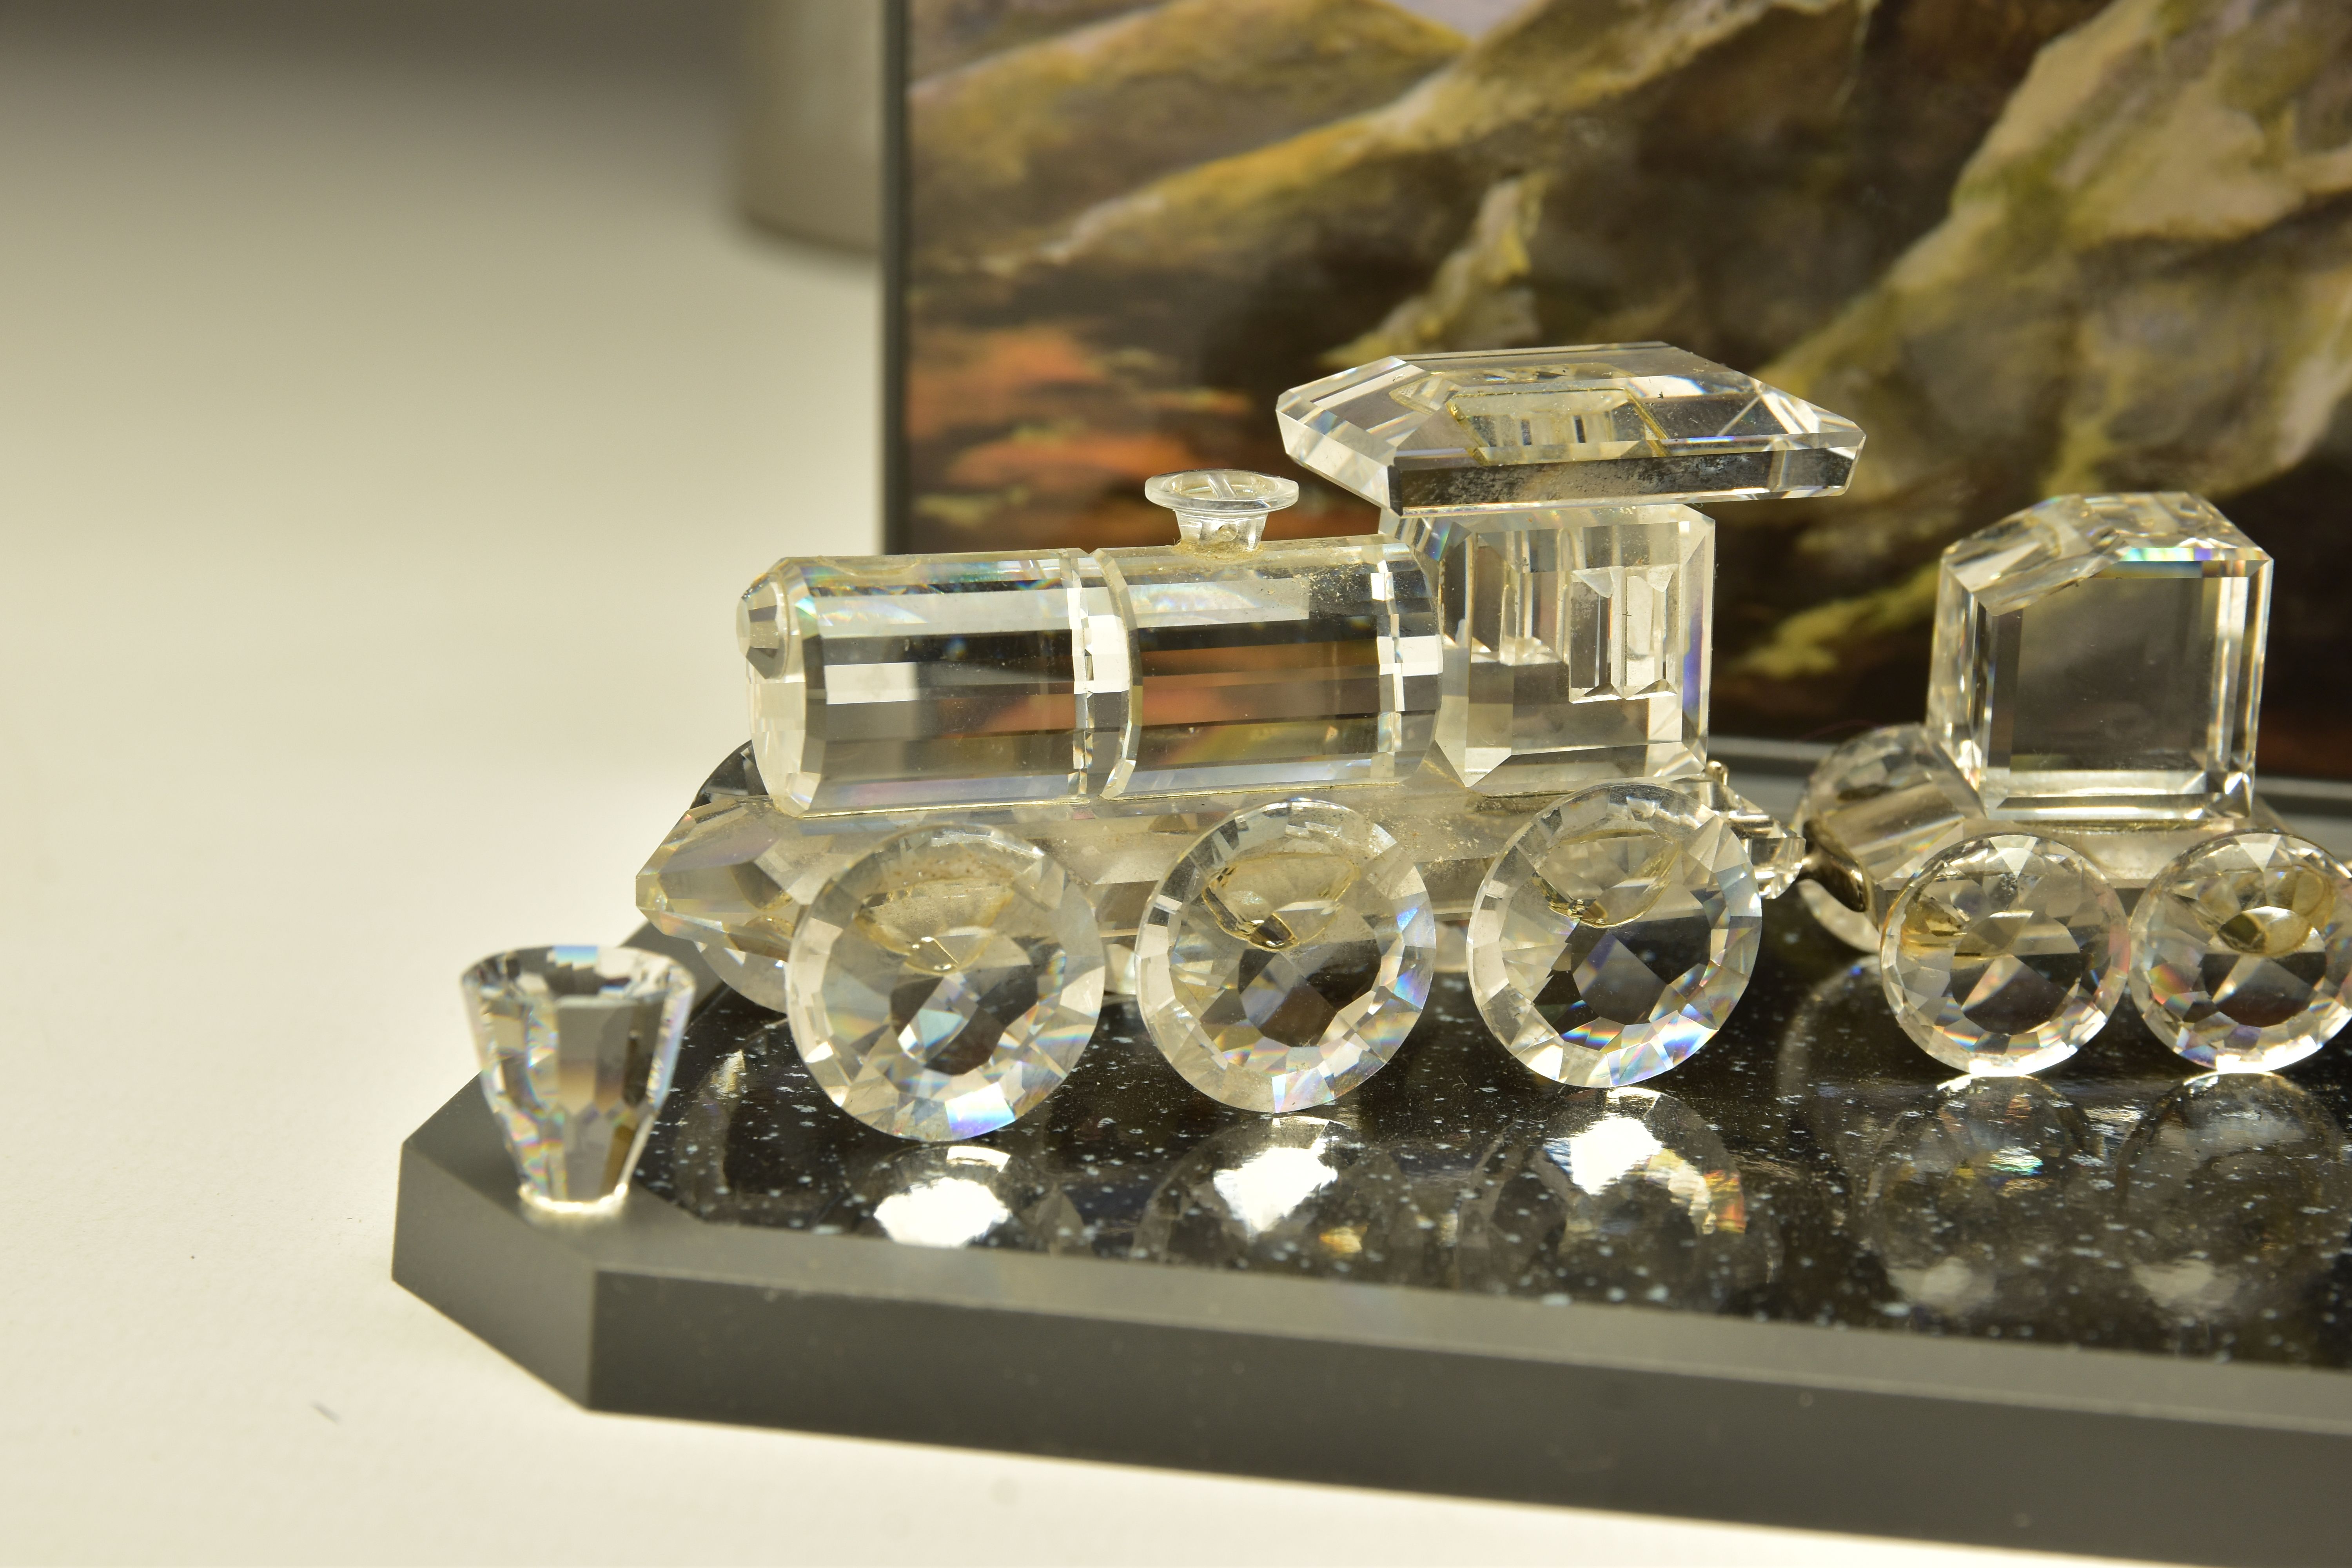 SWAROVSKI CRYSTAL EXPRESS TRAIN FROM WHEN WE WERE YOUNG SERIES, comprising boxed Locomotive (015145) - Image 2 of 5